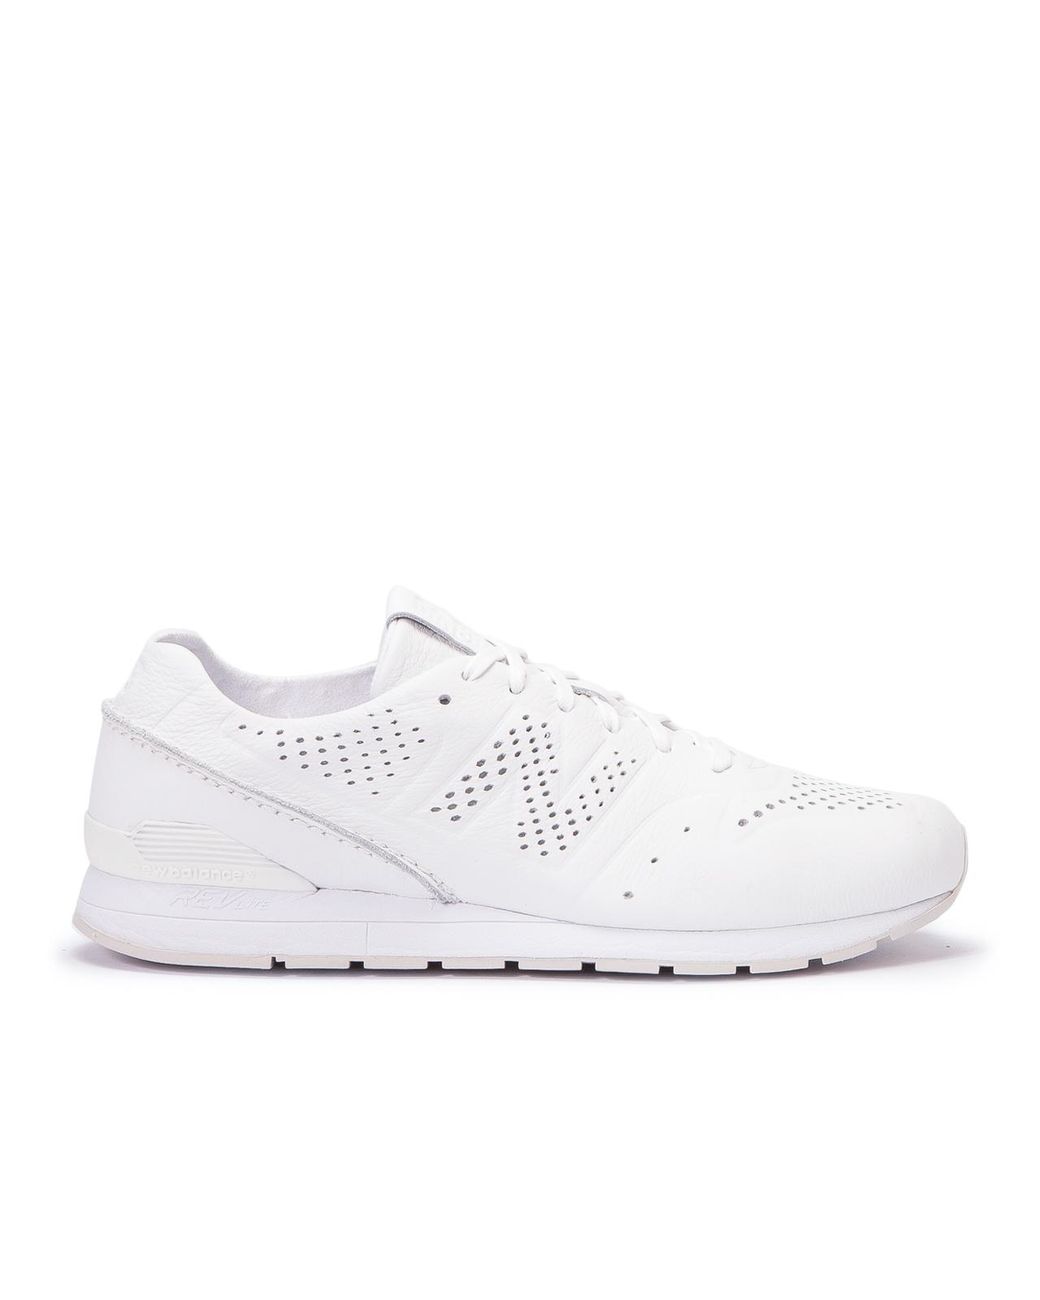 New Balance Suede Mrl 996 Dt "deconstructed Pack" in White | Lyst Canada